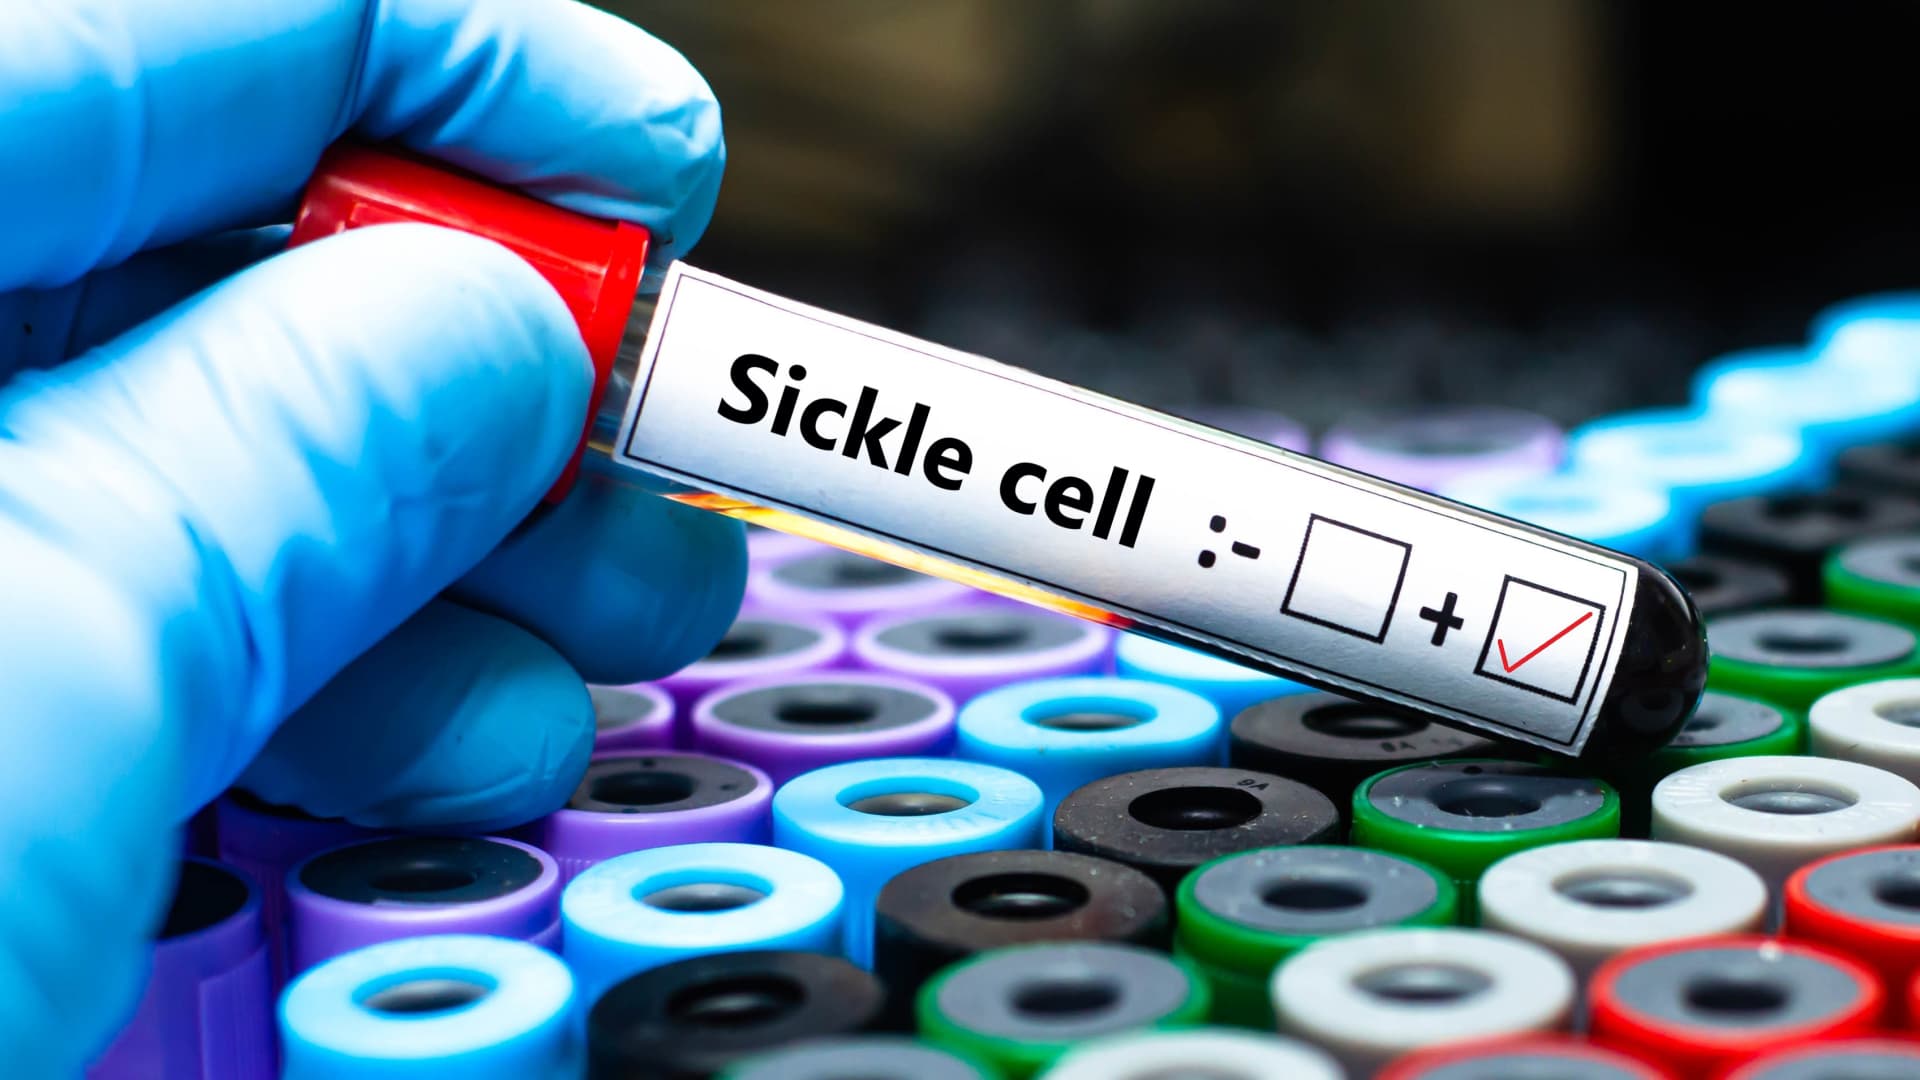 New sickle cell gene therapies are a breakthrough, however fixing learn how to pay their excessive costs is a wrestle